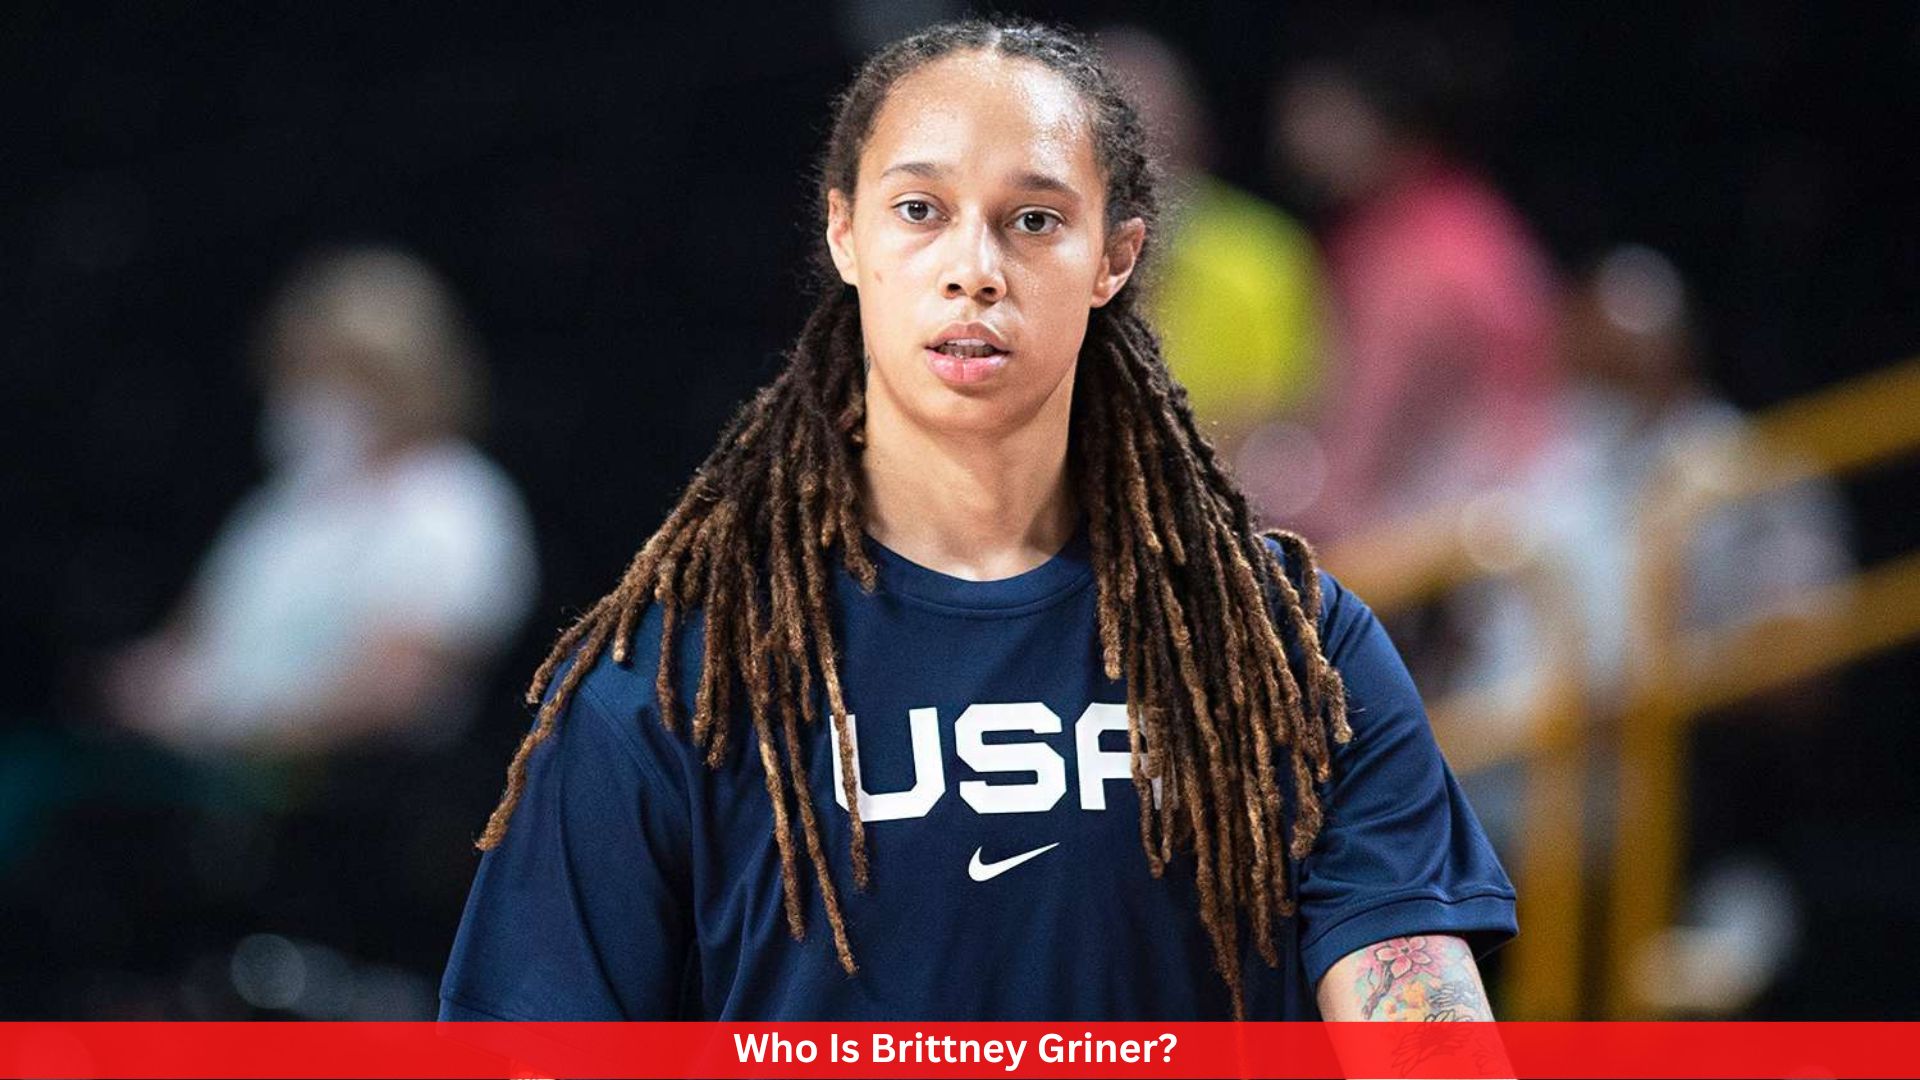 Who Is Brittney Griner? All You Need To Know!